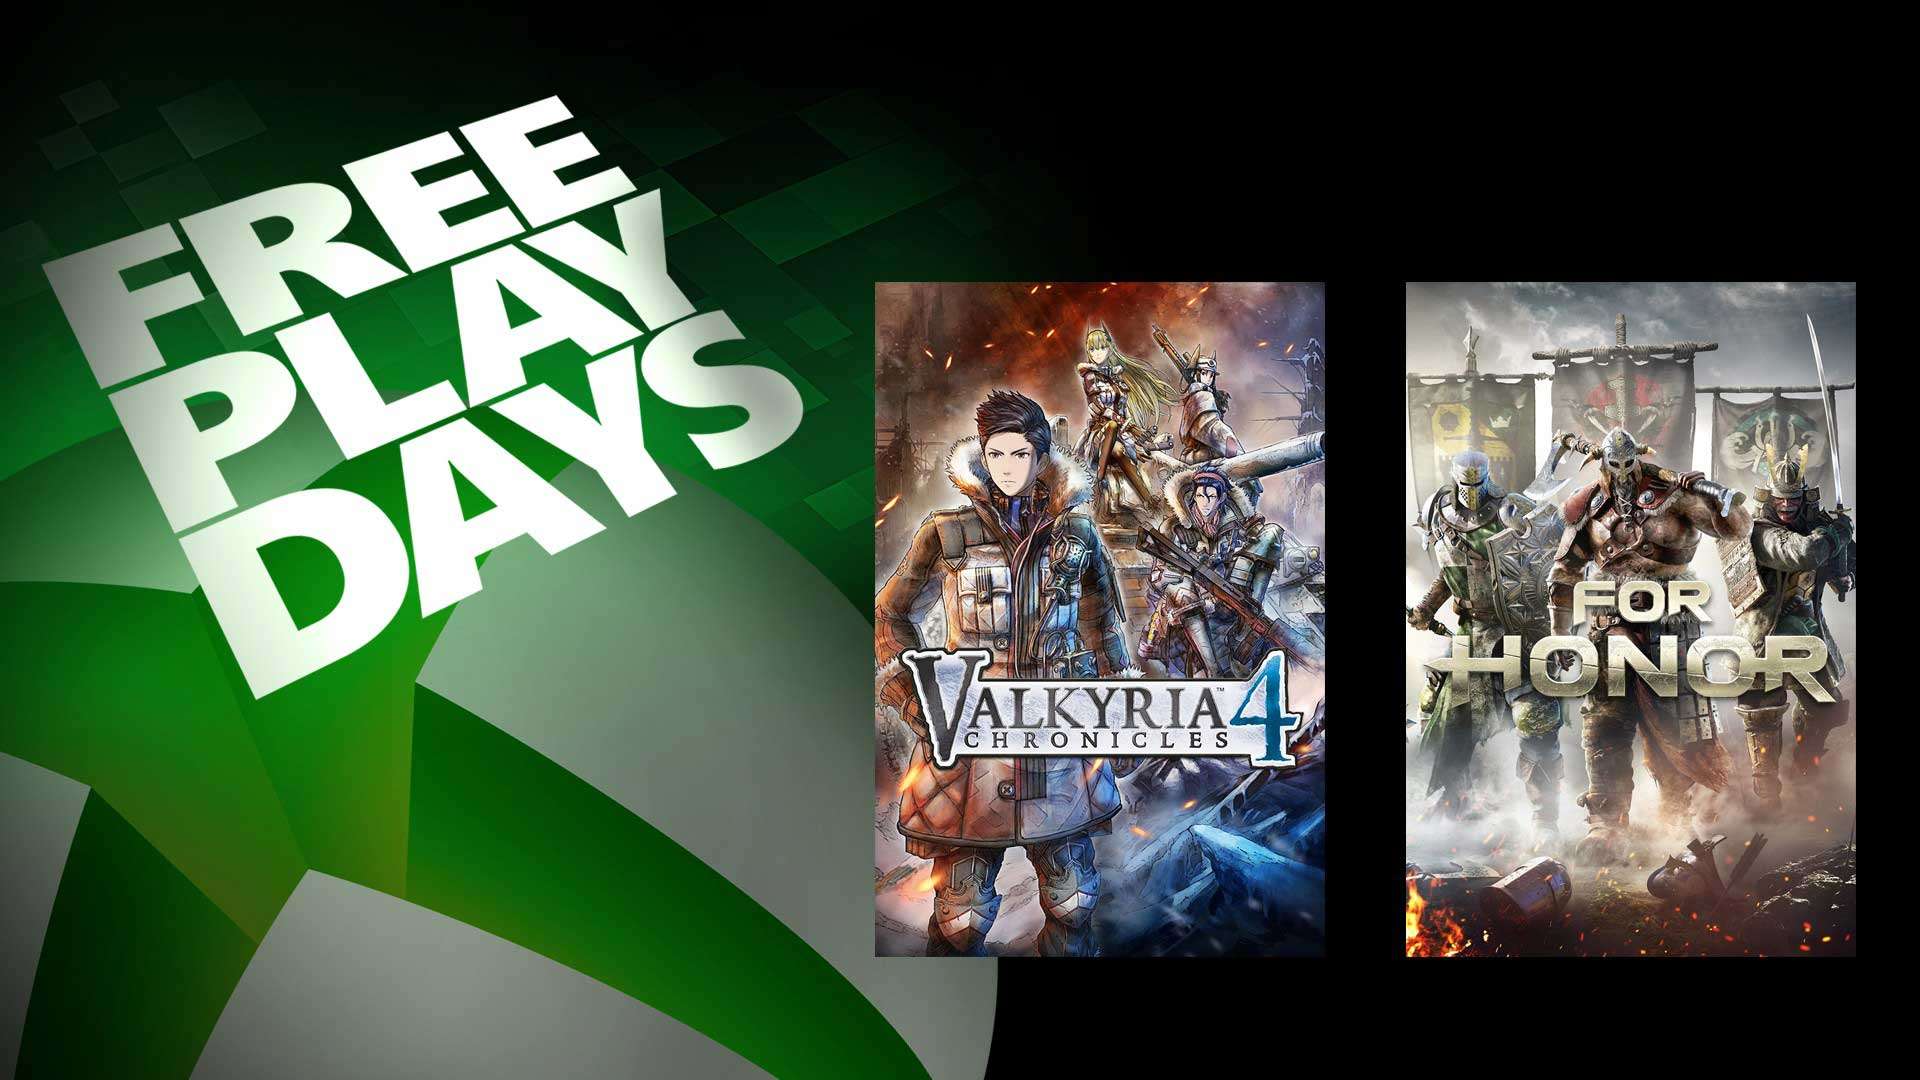 Valkyria Chronicles 4 and For Honor are featured as part of this weekend's Xbox Free Play Days.